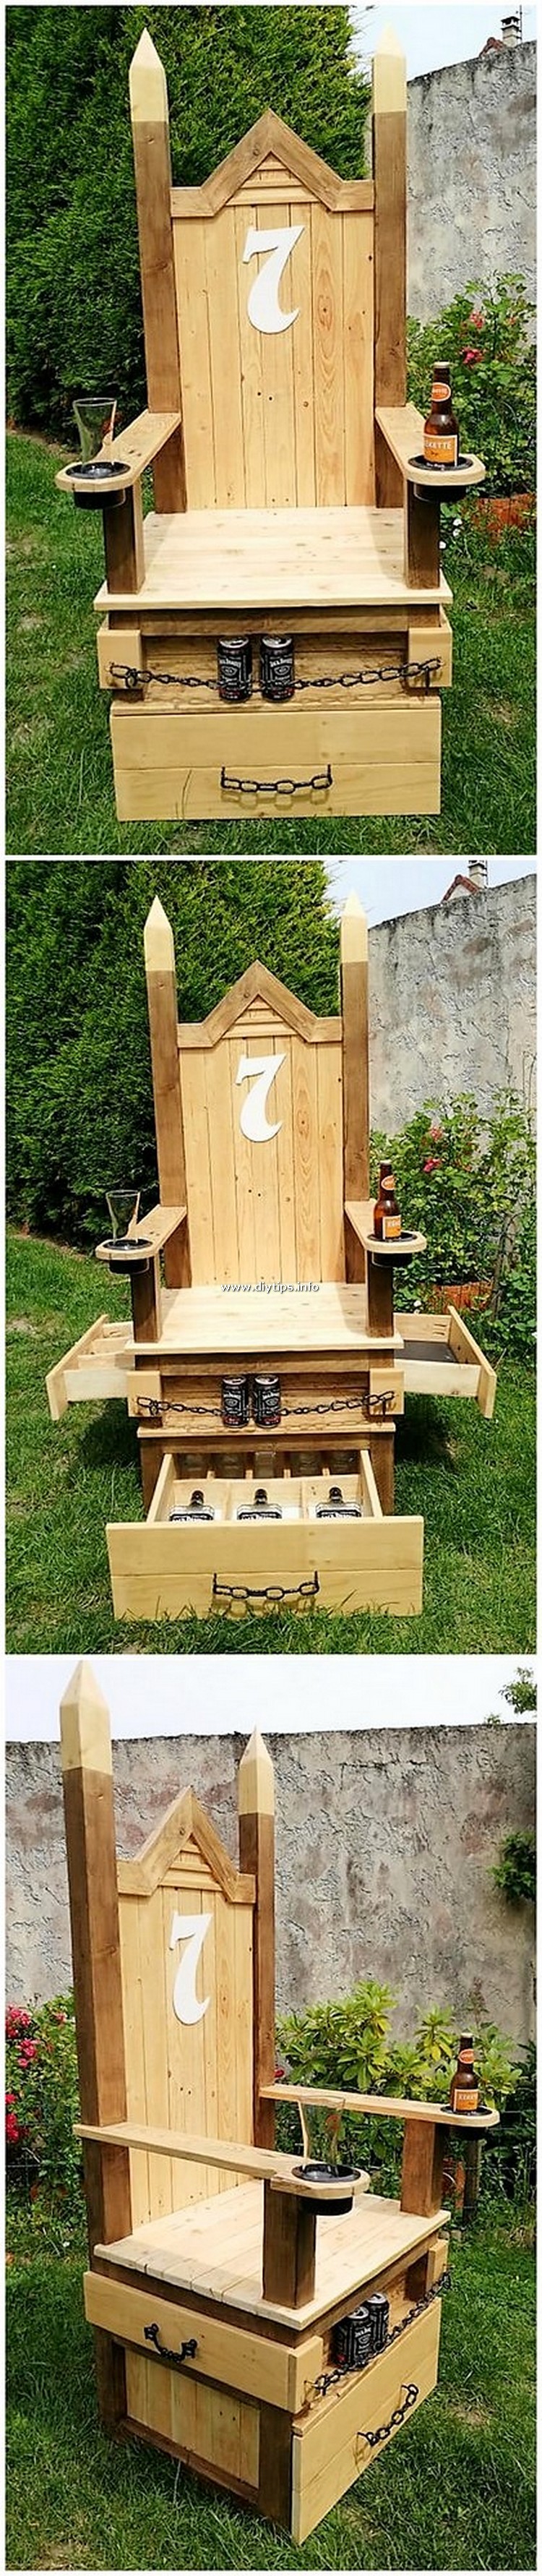 Pallet Chair with Drawers